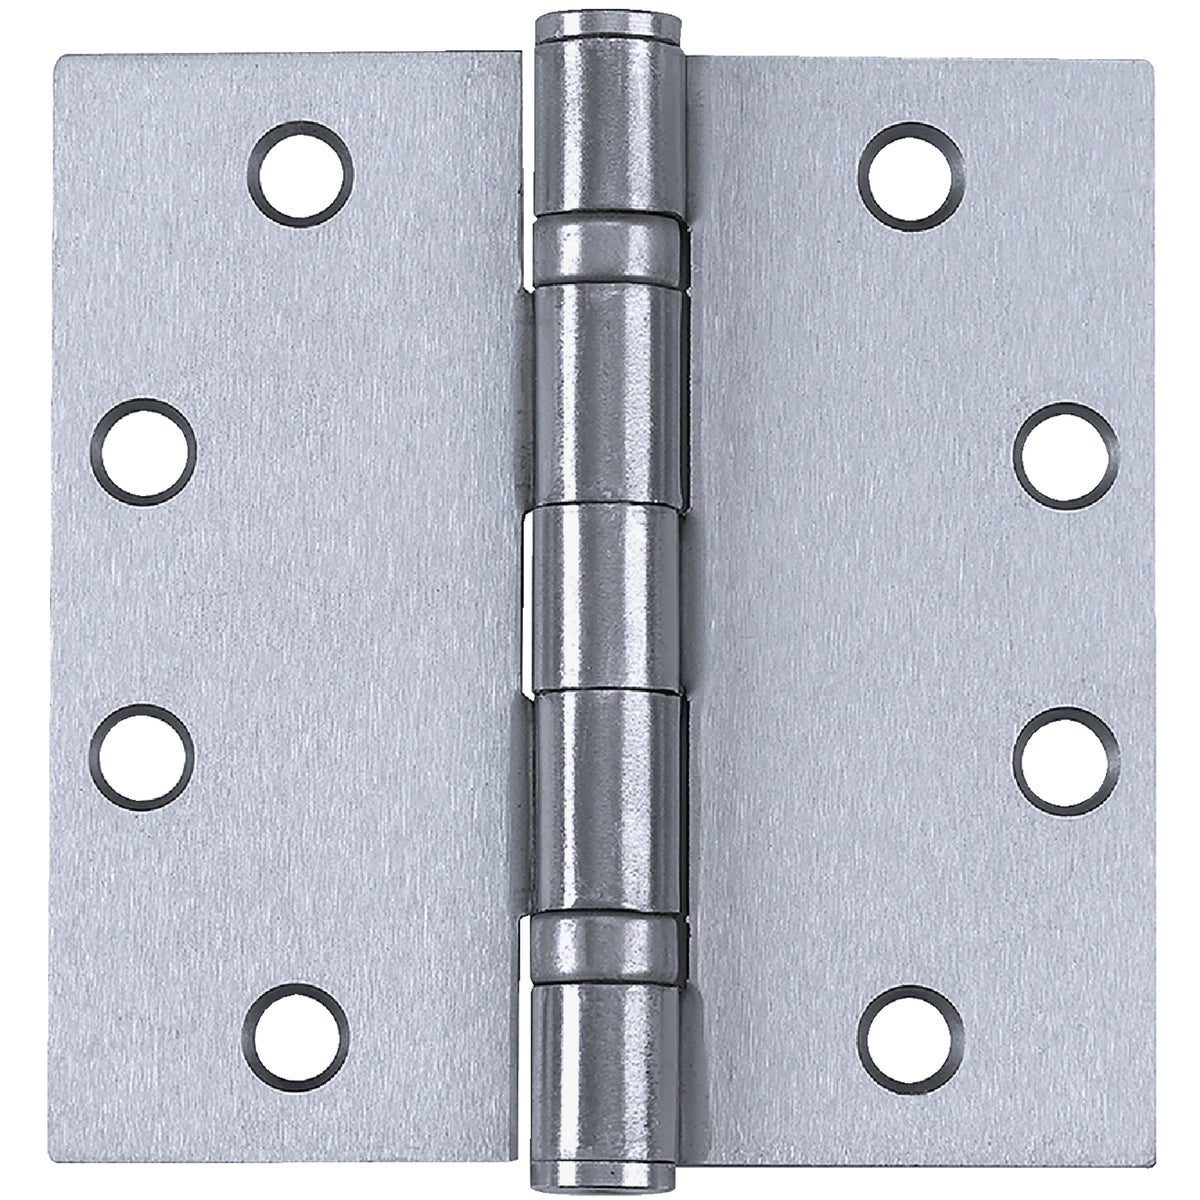 Item 227651, Heavy duty commercial square ball bearing hinge with square corners is made